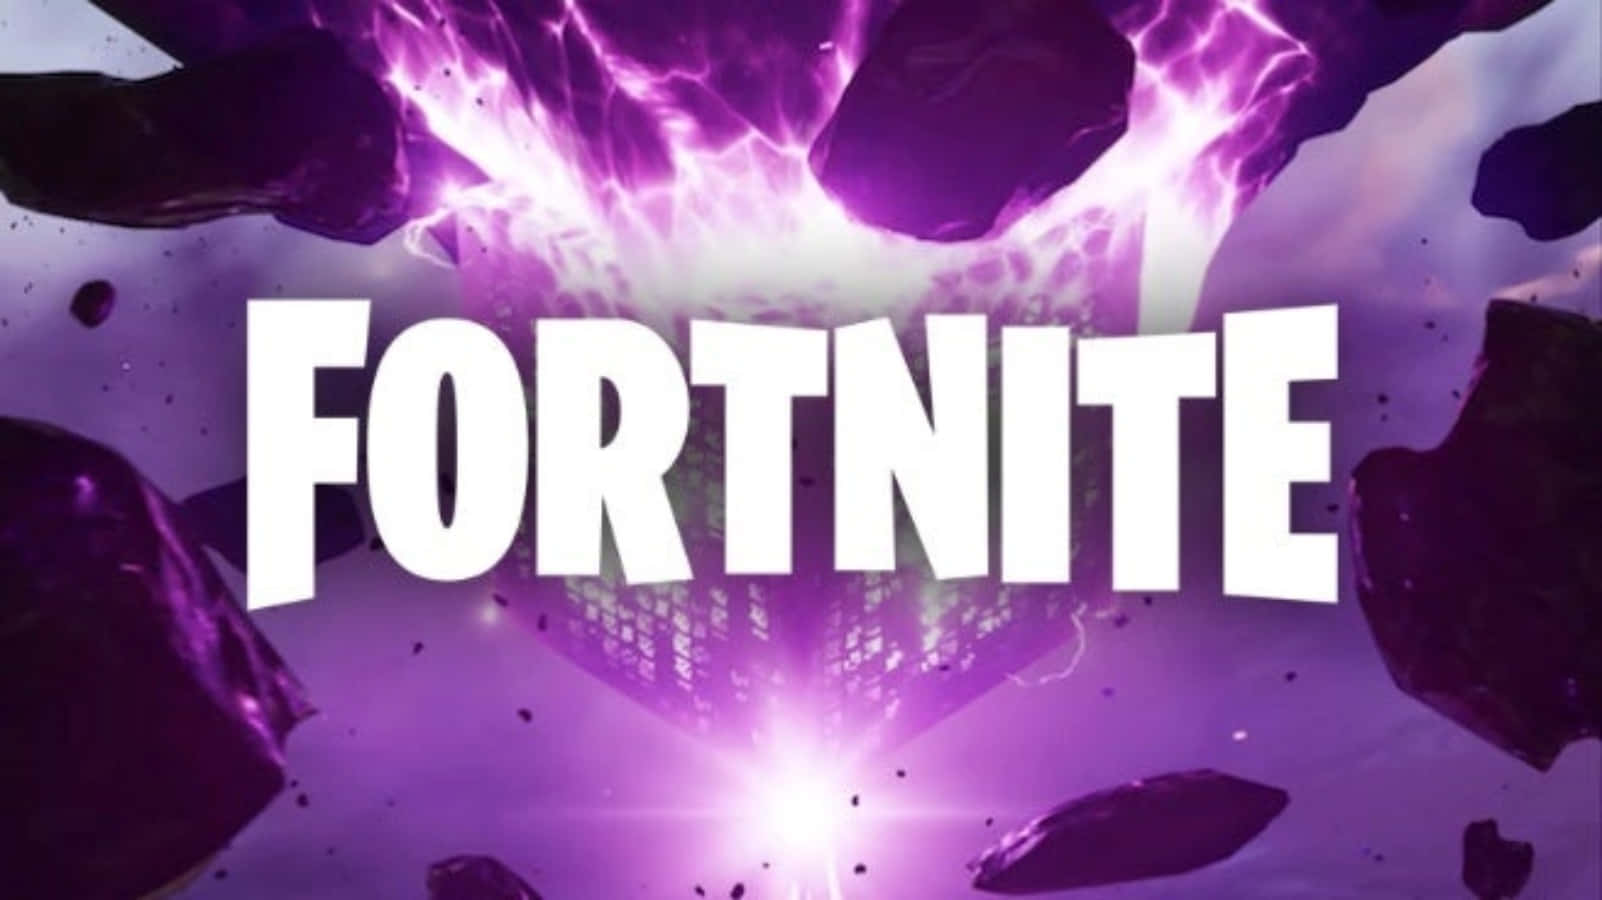 Cool Fortnite Logo And Purple Electric Strikes Wallpaper